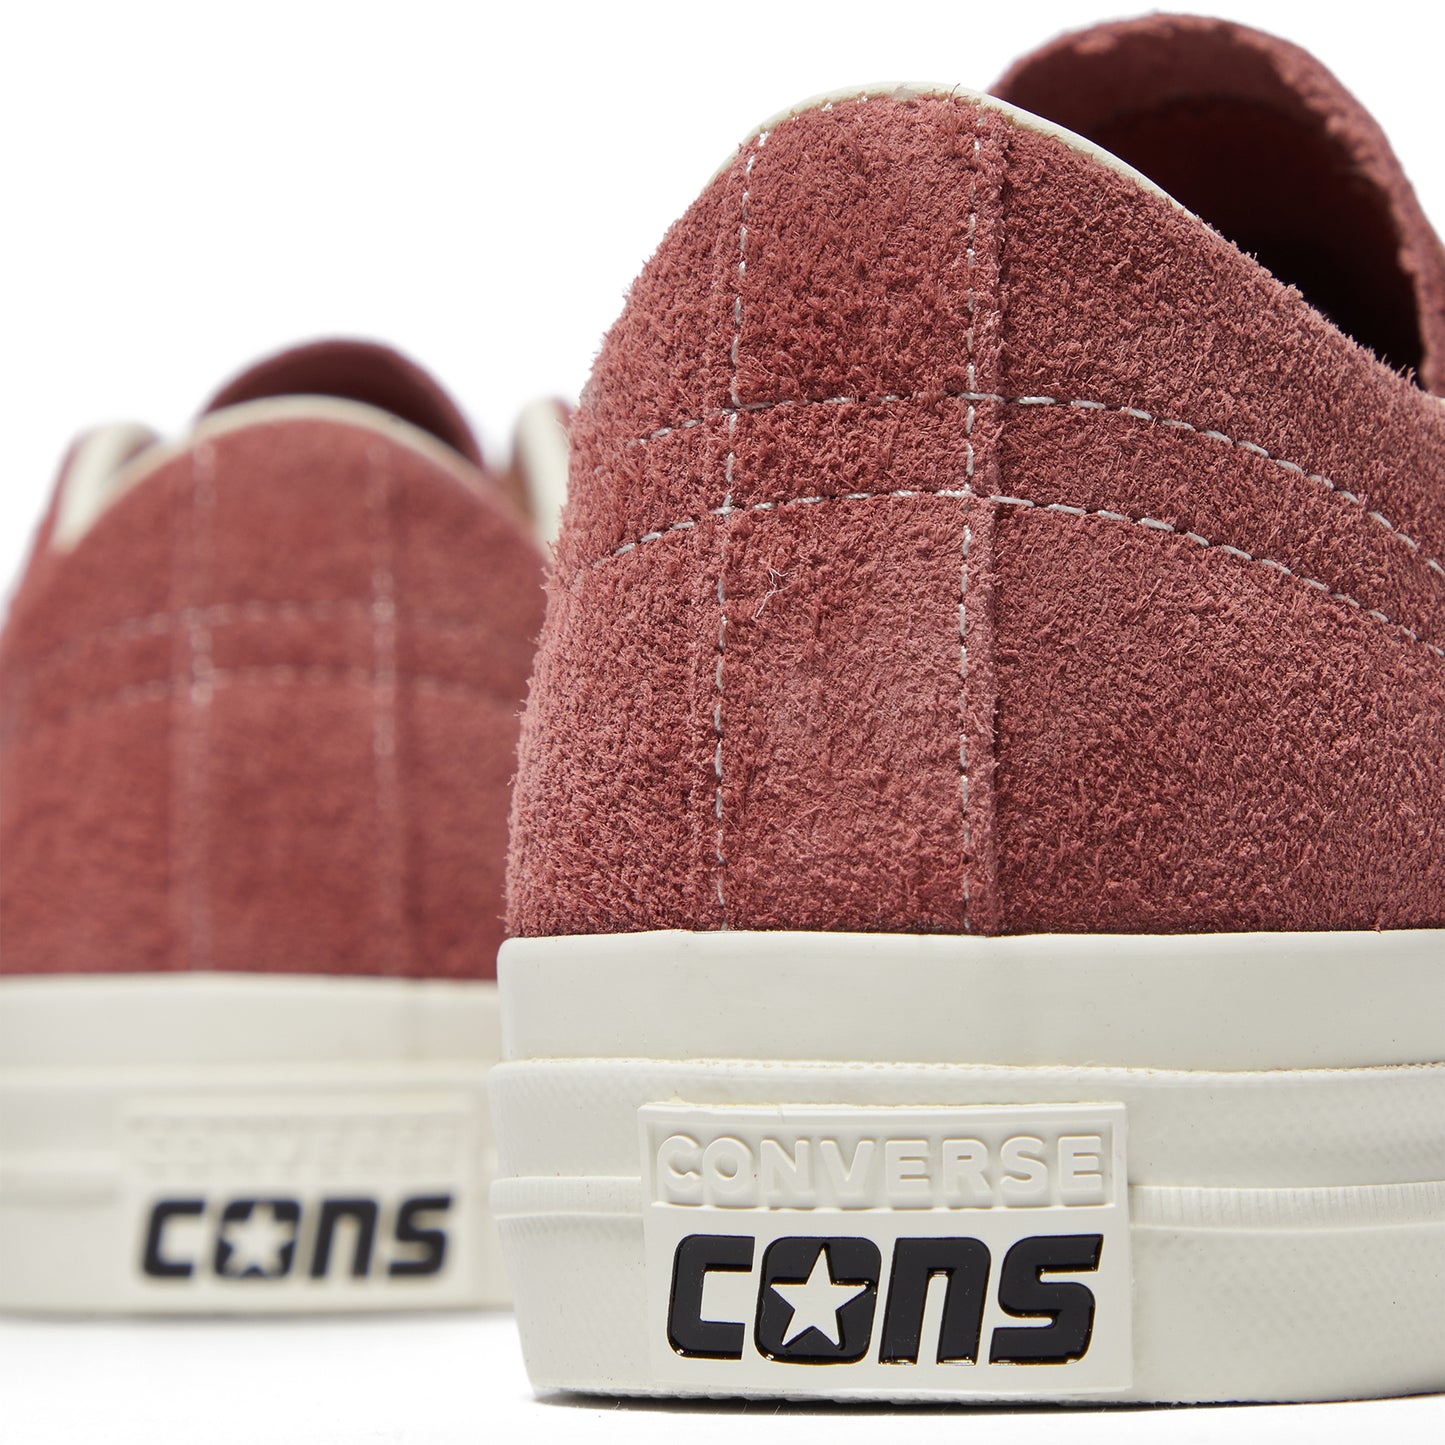 Converse One Star Pro OX (Cave Shadow/Egret)